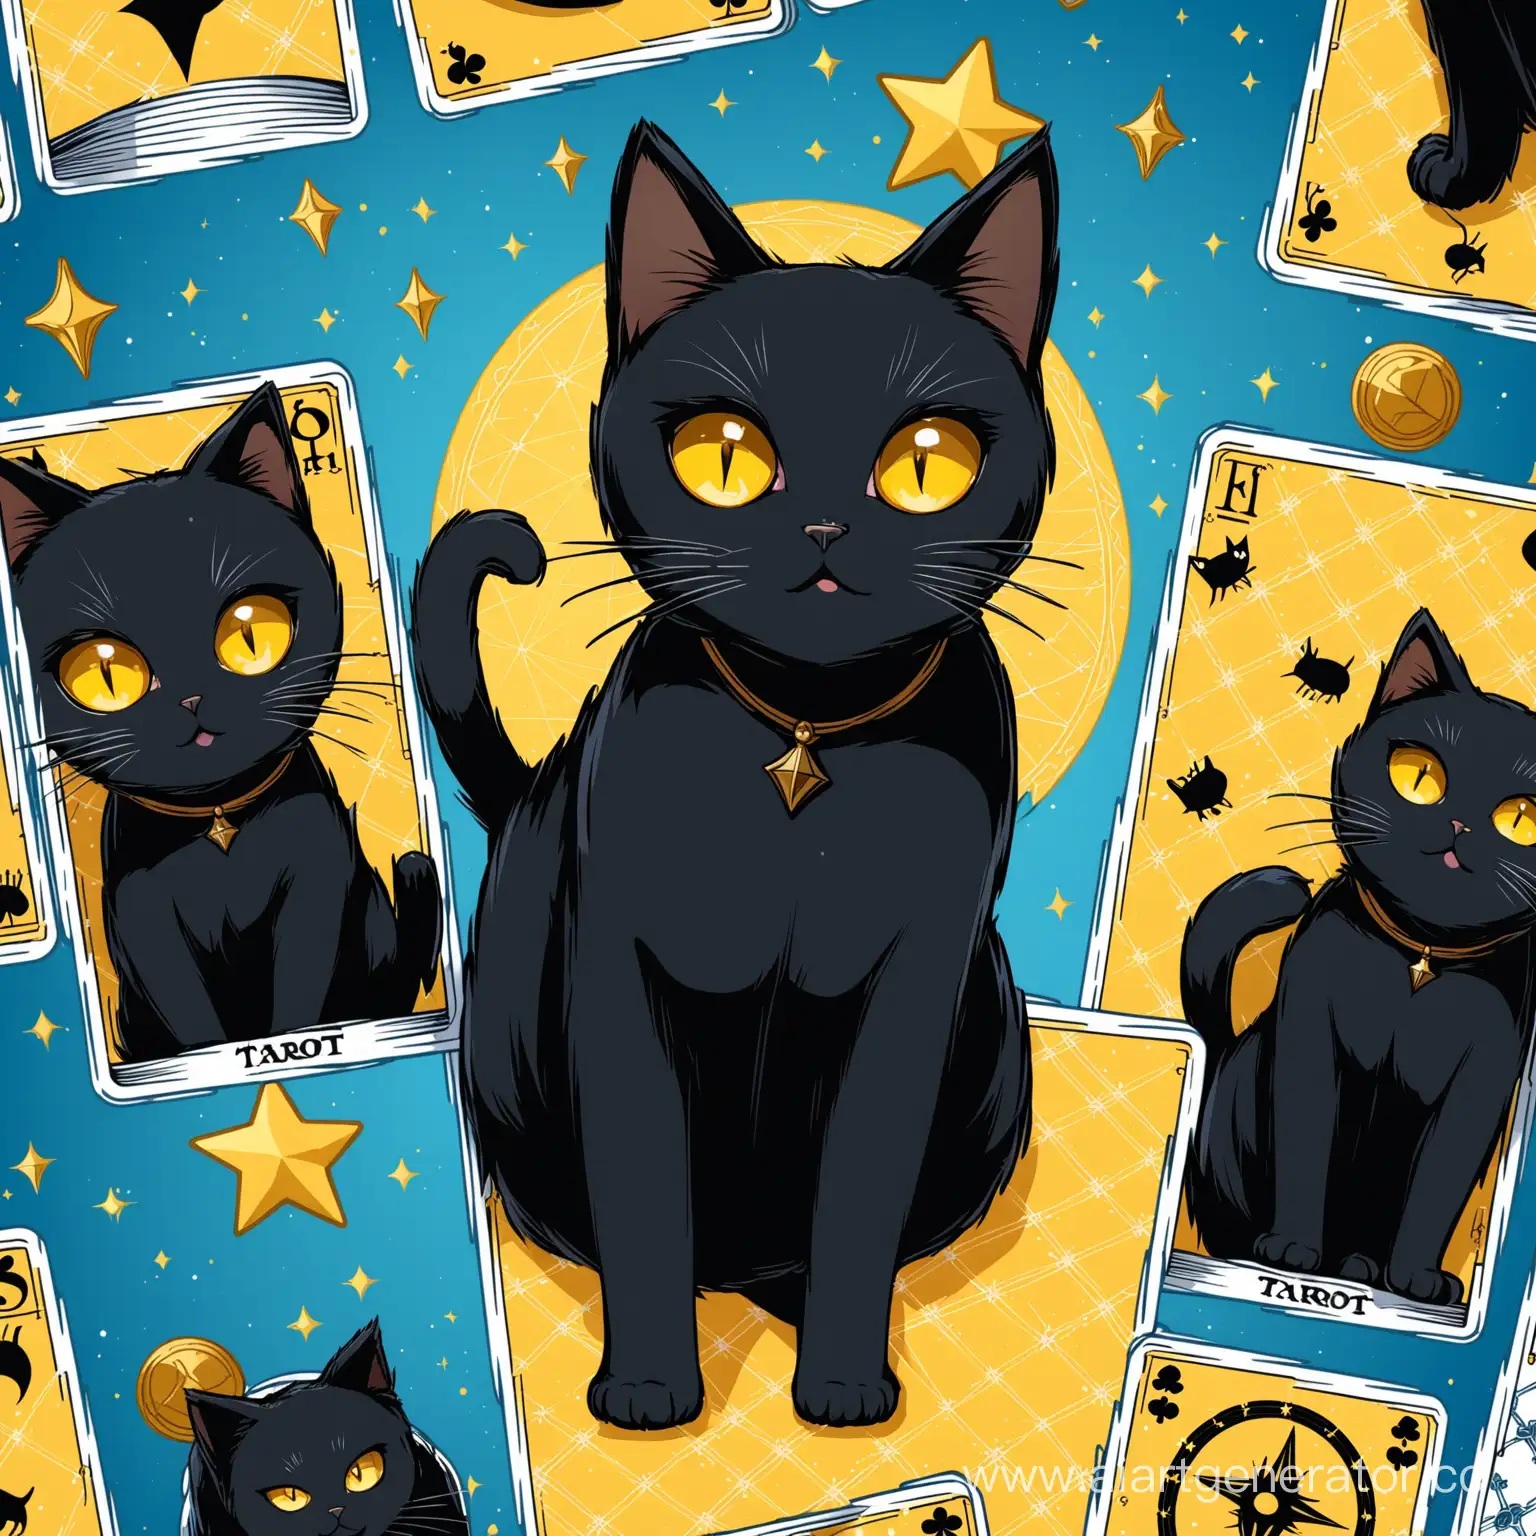 Mysterious-Black-Cats-with-Yellow-Eyes-Among-Tarot-Cards-on-Blue-Background